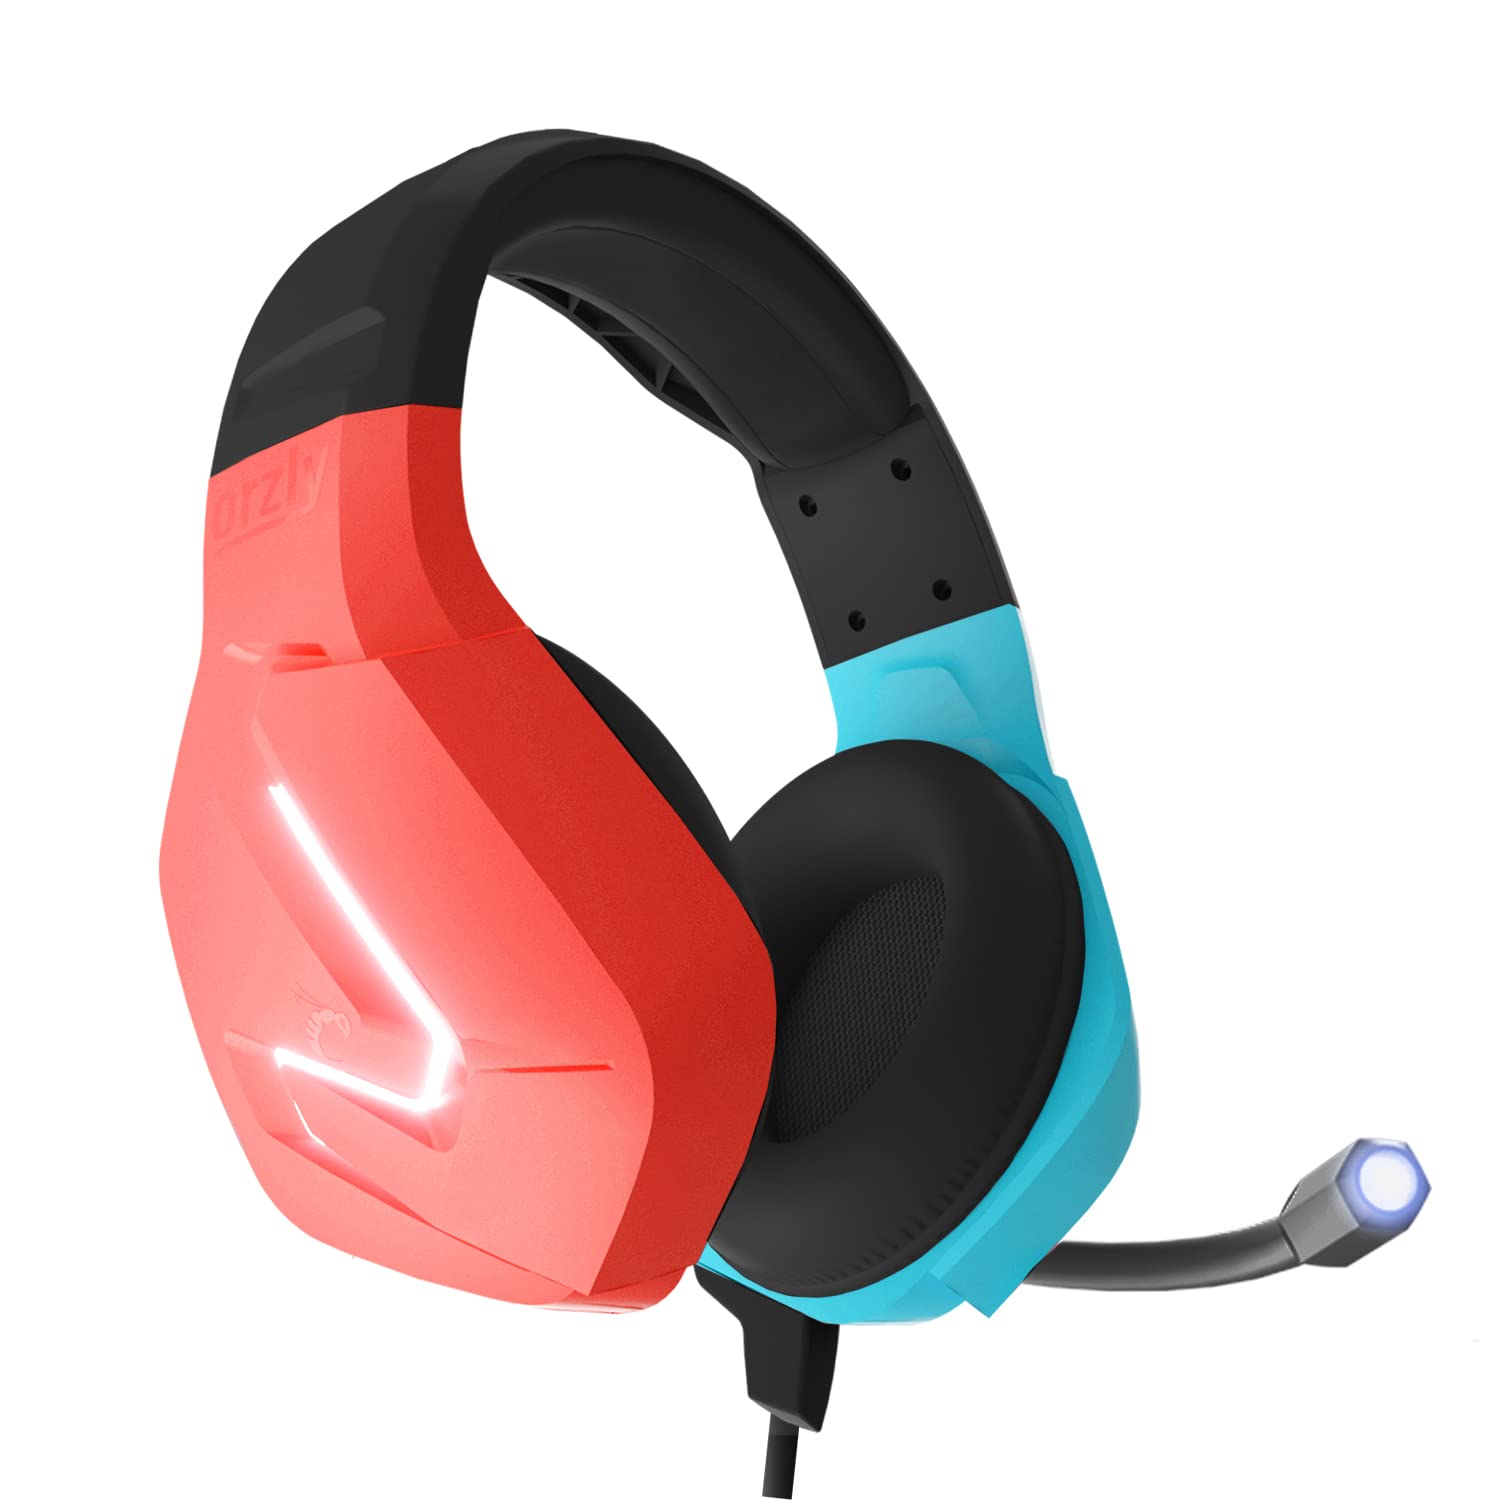 Nintendo Switch Headset With Mic: A Must-Have Gaming Accessory In 2023